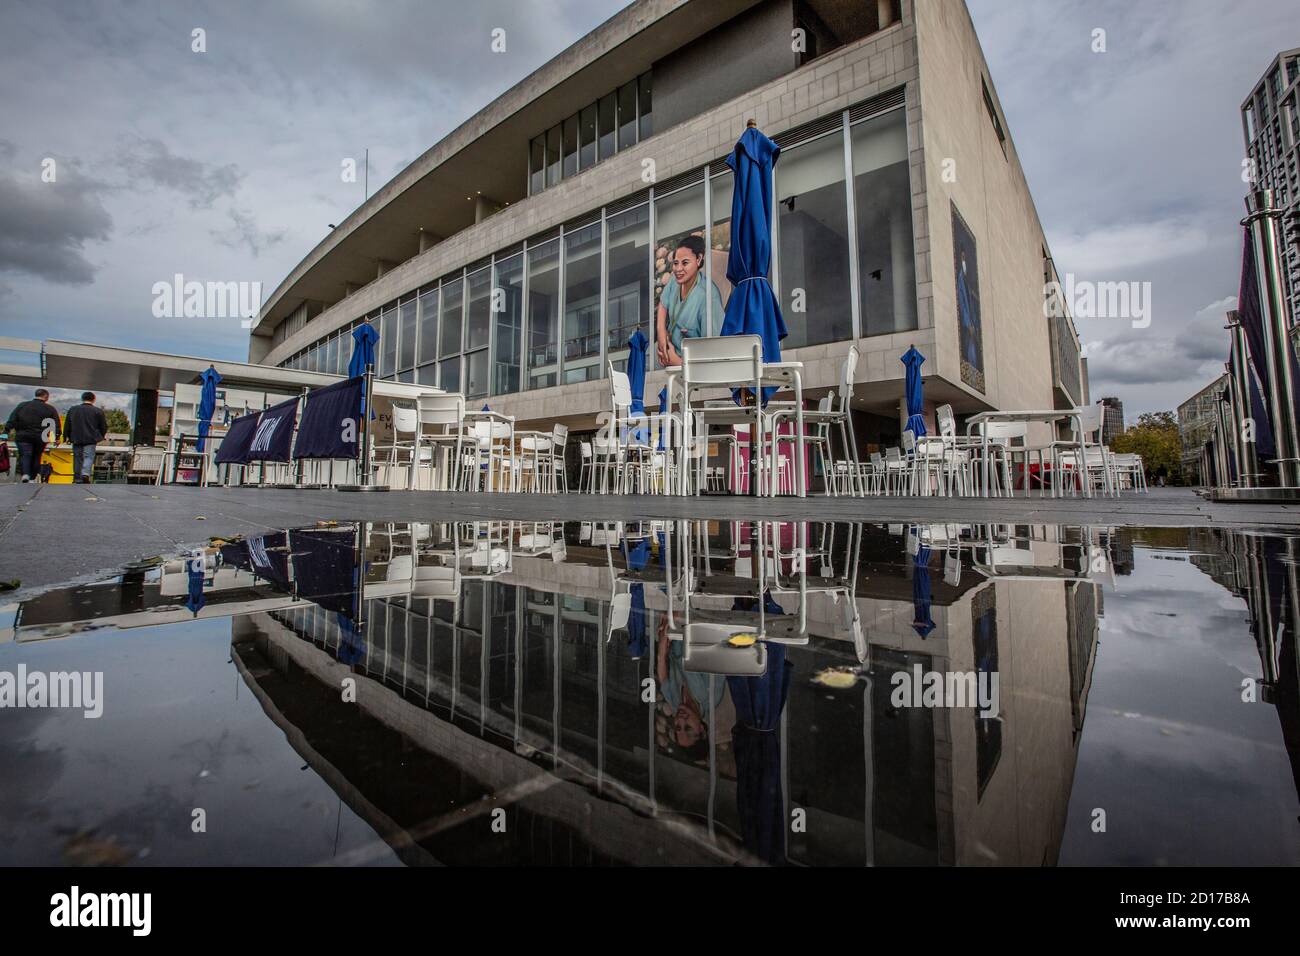 Royal Festival Hall sits empty reflected in a rain water puddle as it continues to stay closed due to coronavirus pandemic restrictions, London, UK Stock Photo